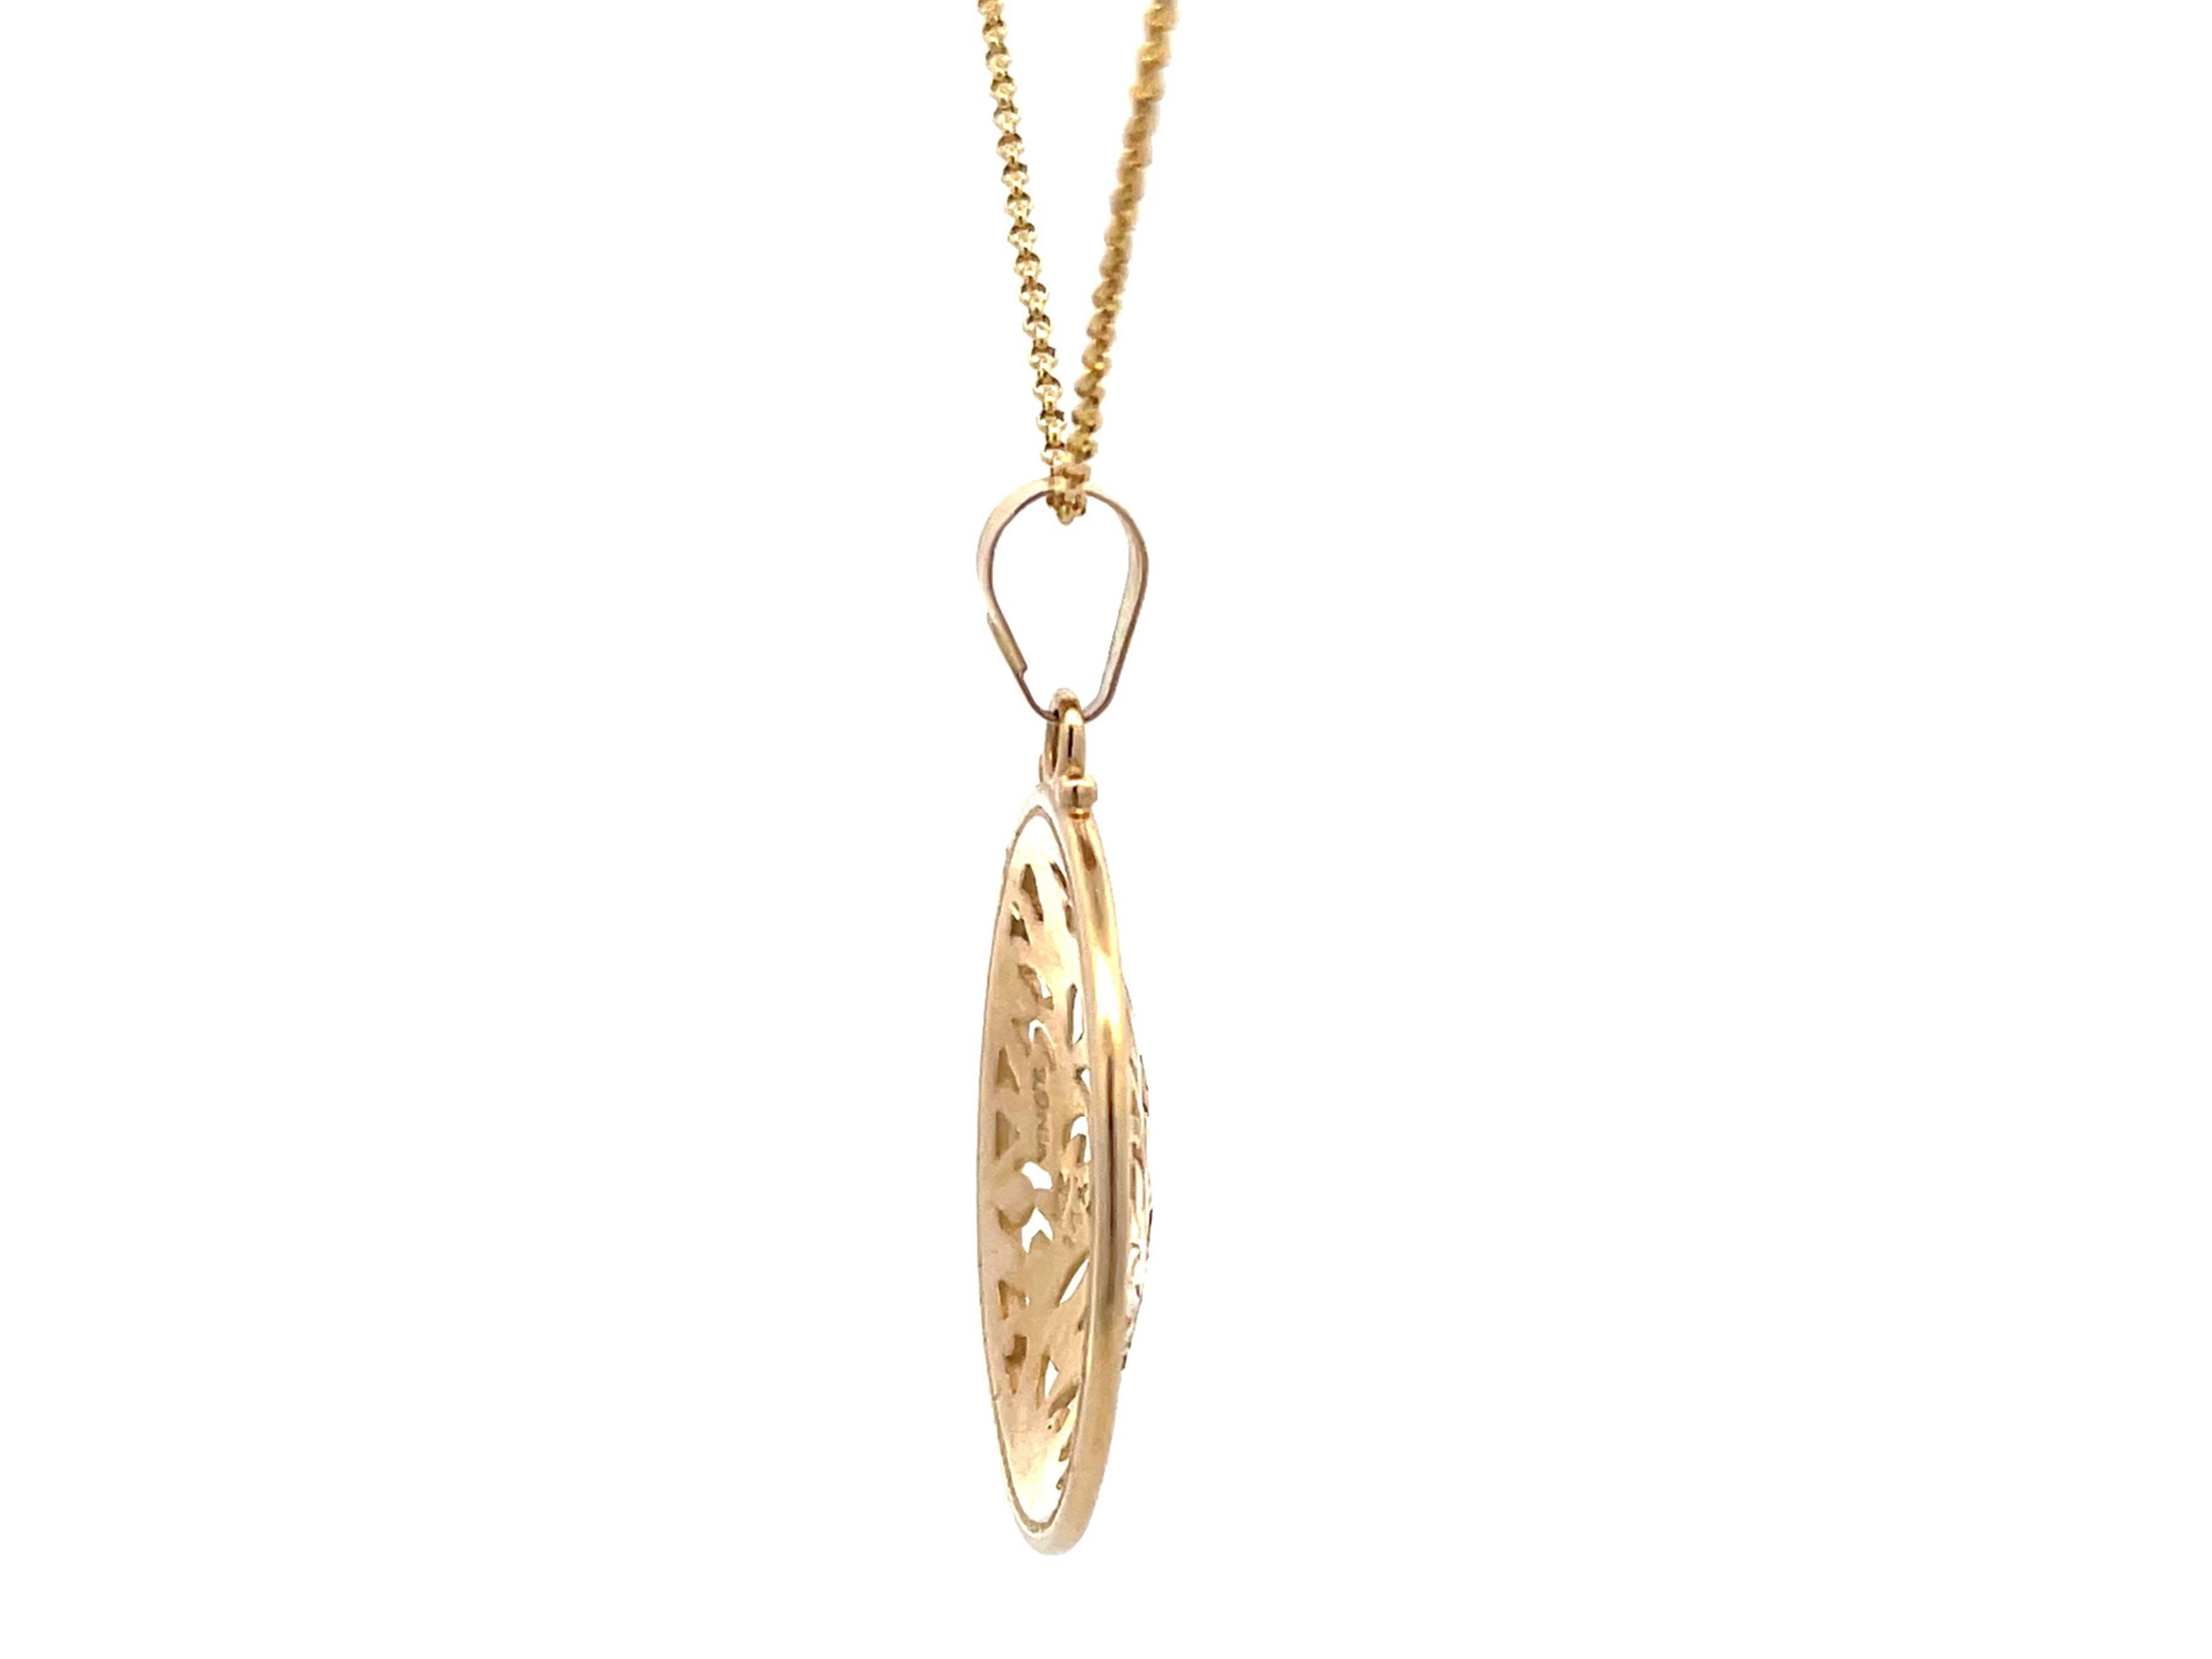 Mings Hawaii Long Life Round Pendant in 14Karat Yellow Gold with Chain In Excellent Condition For Sale In Honolulu, HI